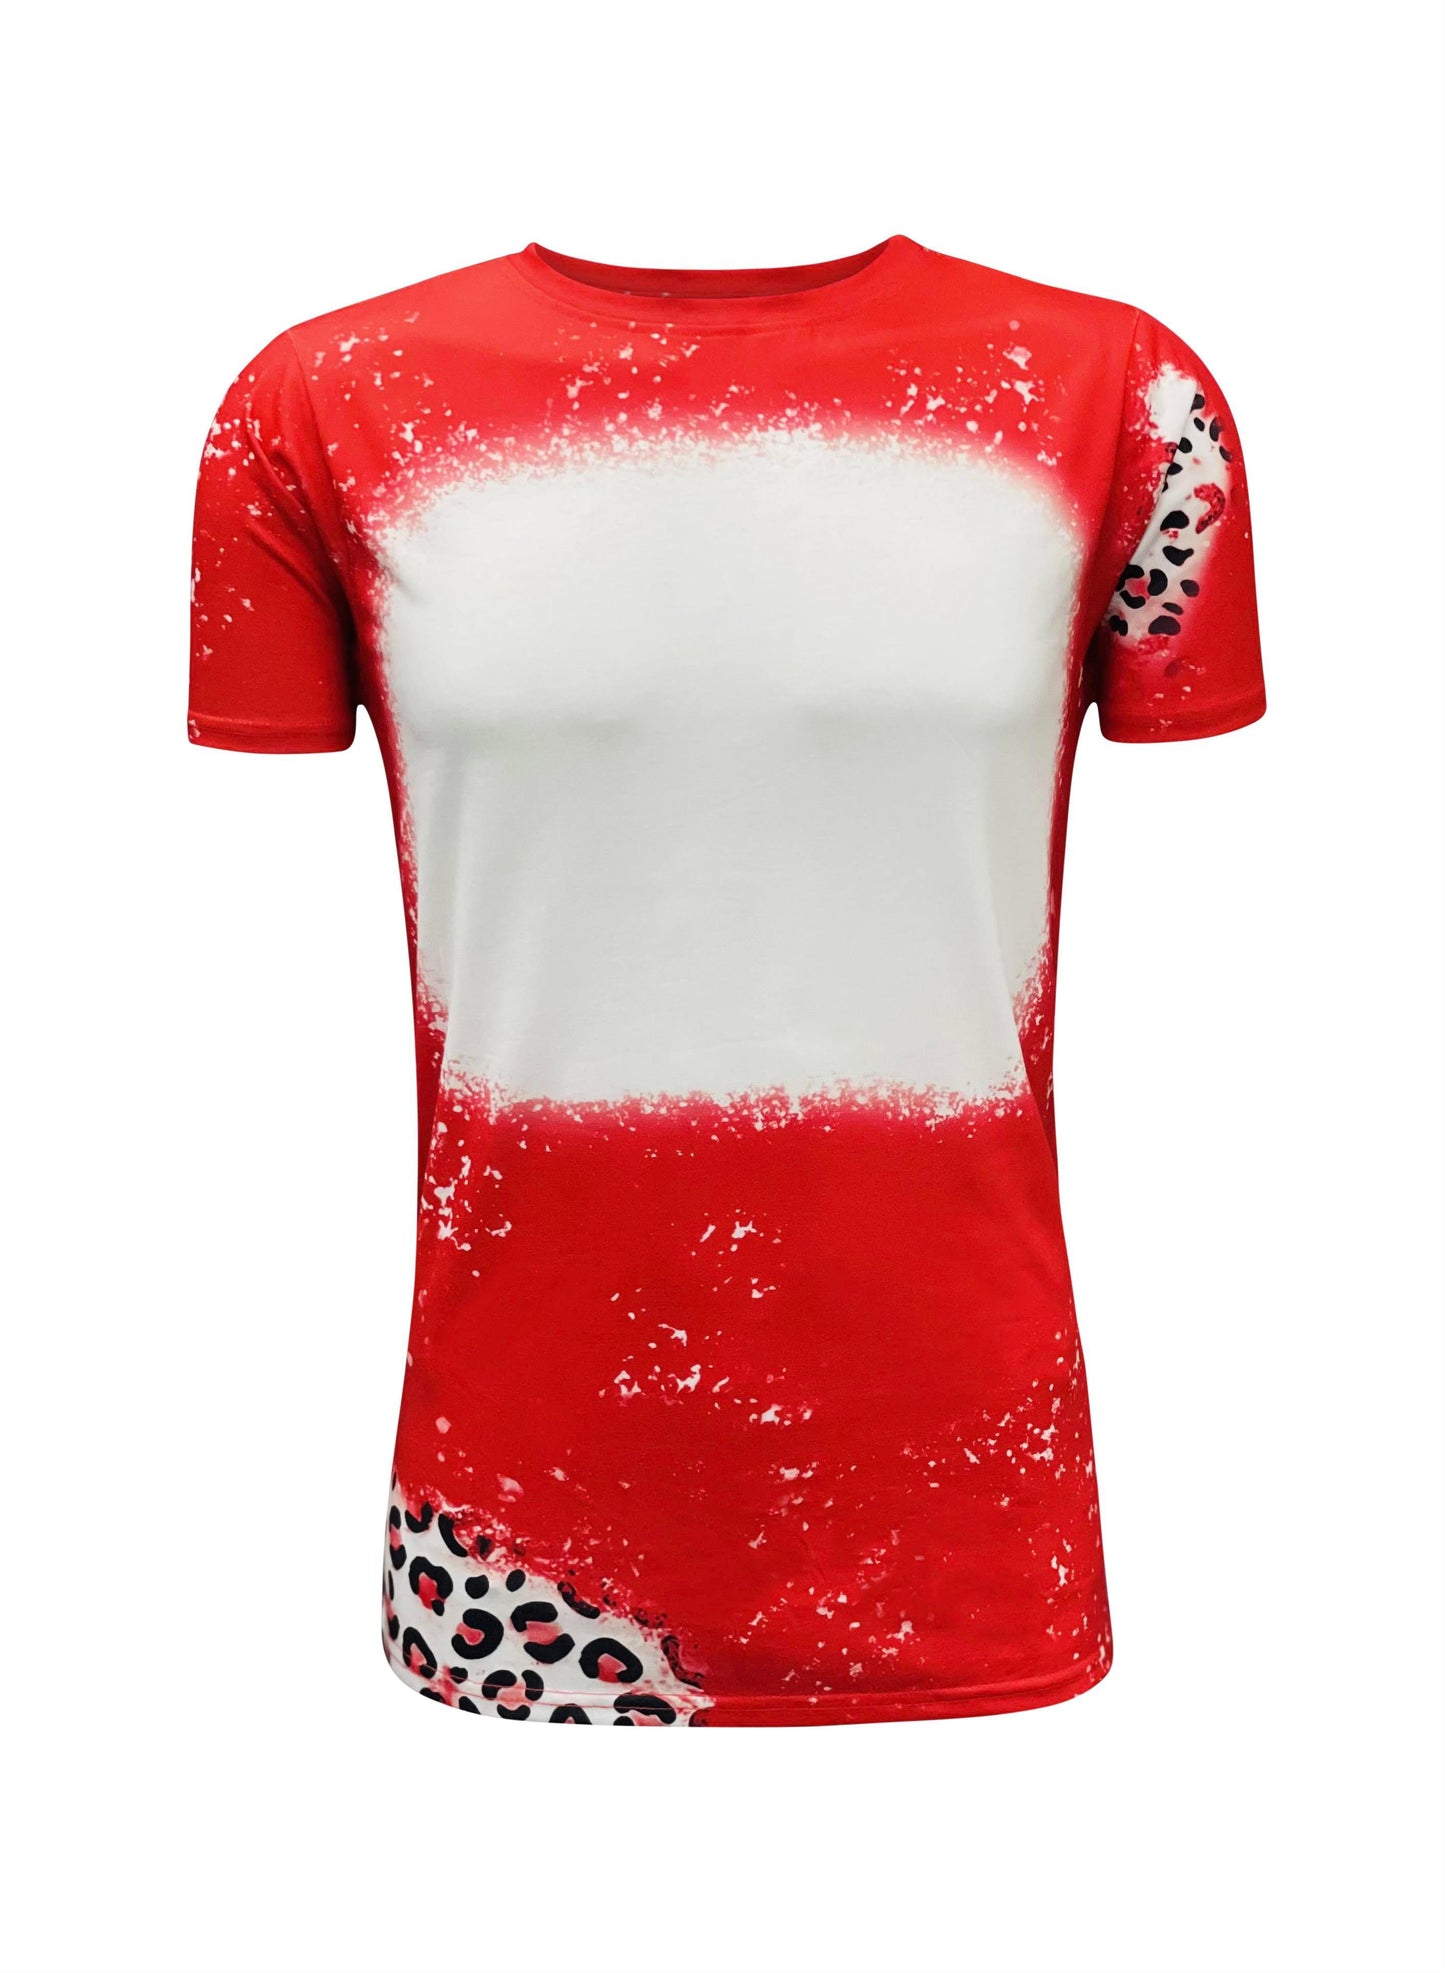 Cheetah Unisex Faux Bleached Shirts, ready for Sublimation or Screen Transfer